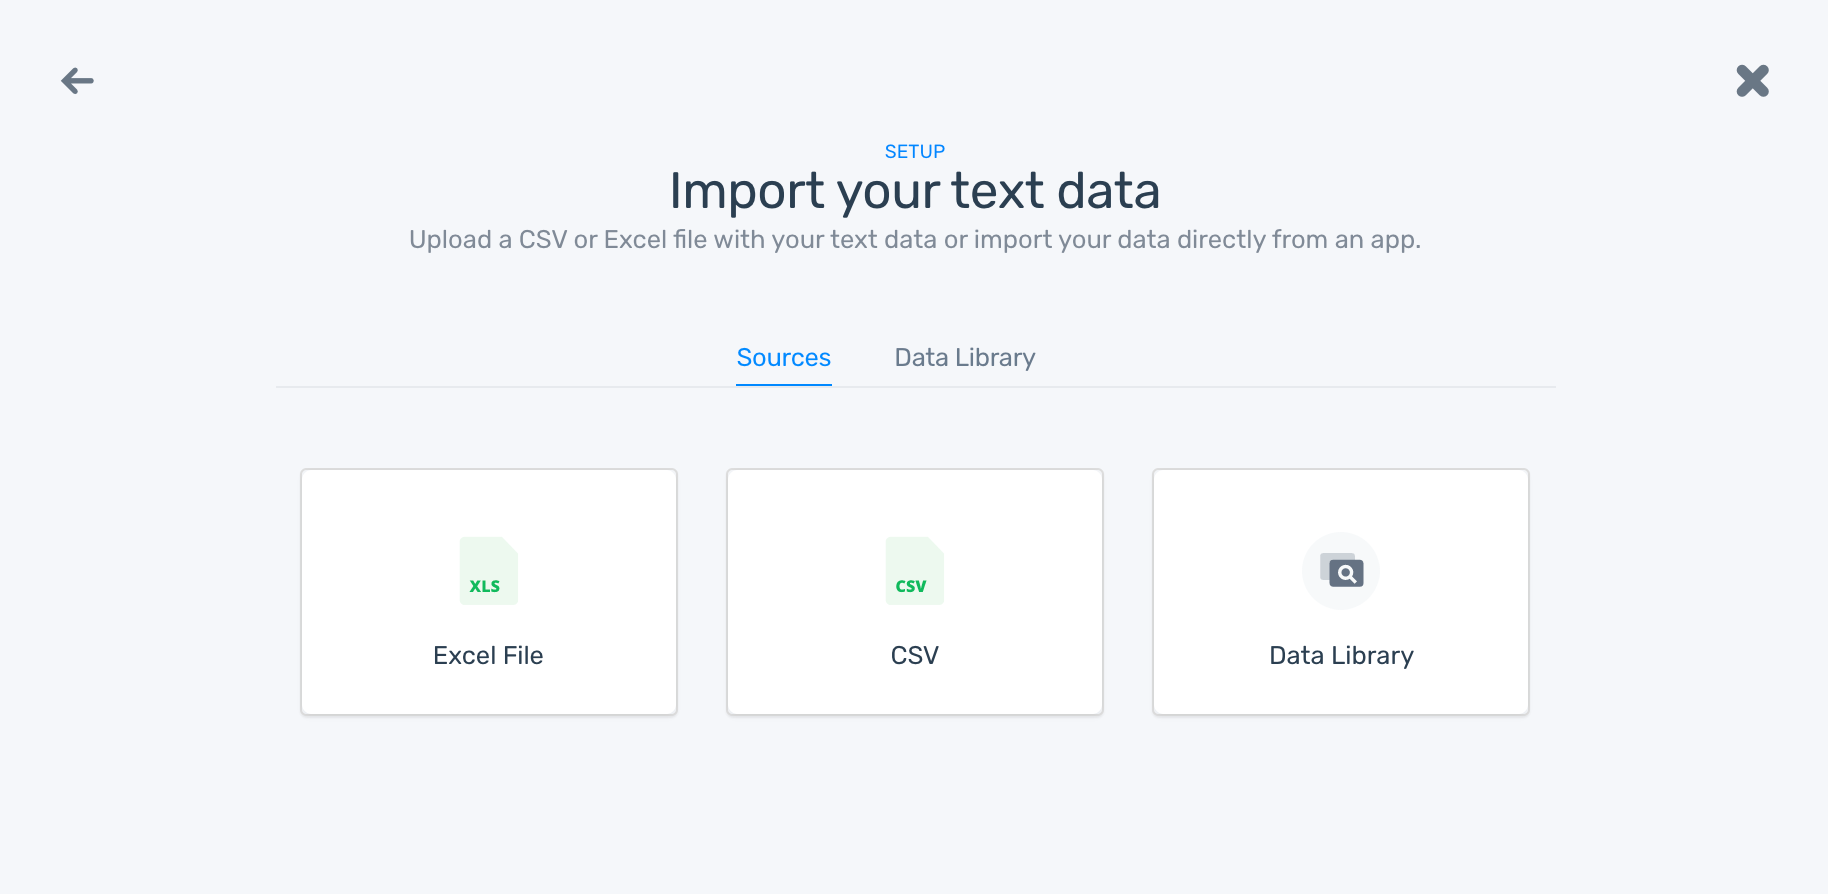 Sources that you can import data from, including Excel, CSV, Twitter, and Zendesk.